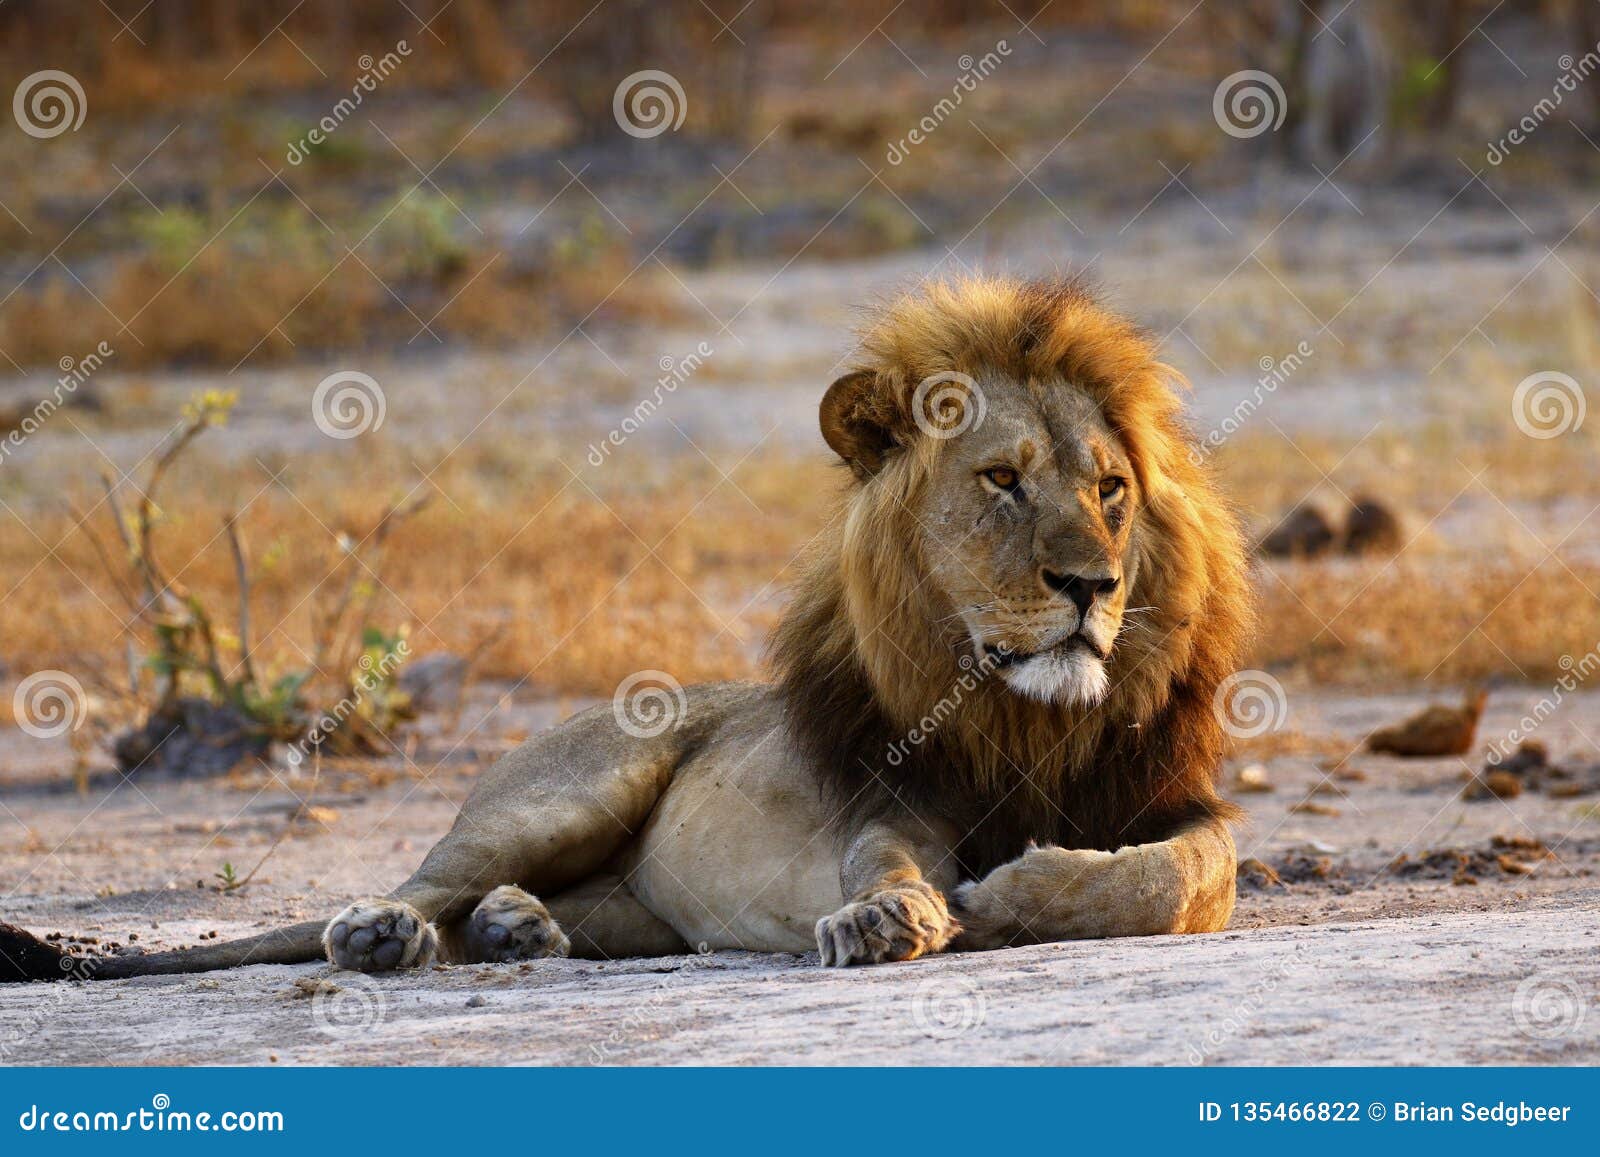 Superb Adult Male Lion Leads the Pride Stock Photo - Image of ...